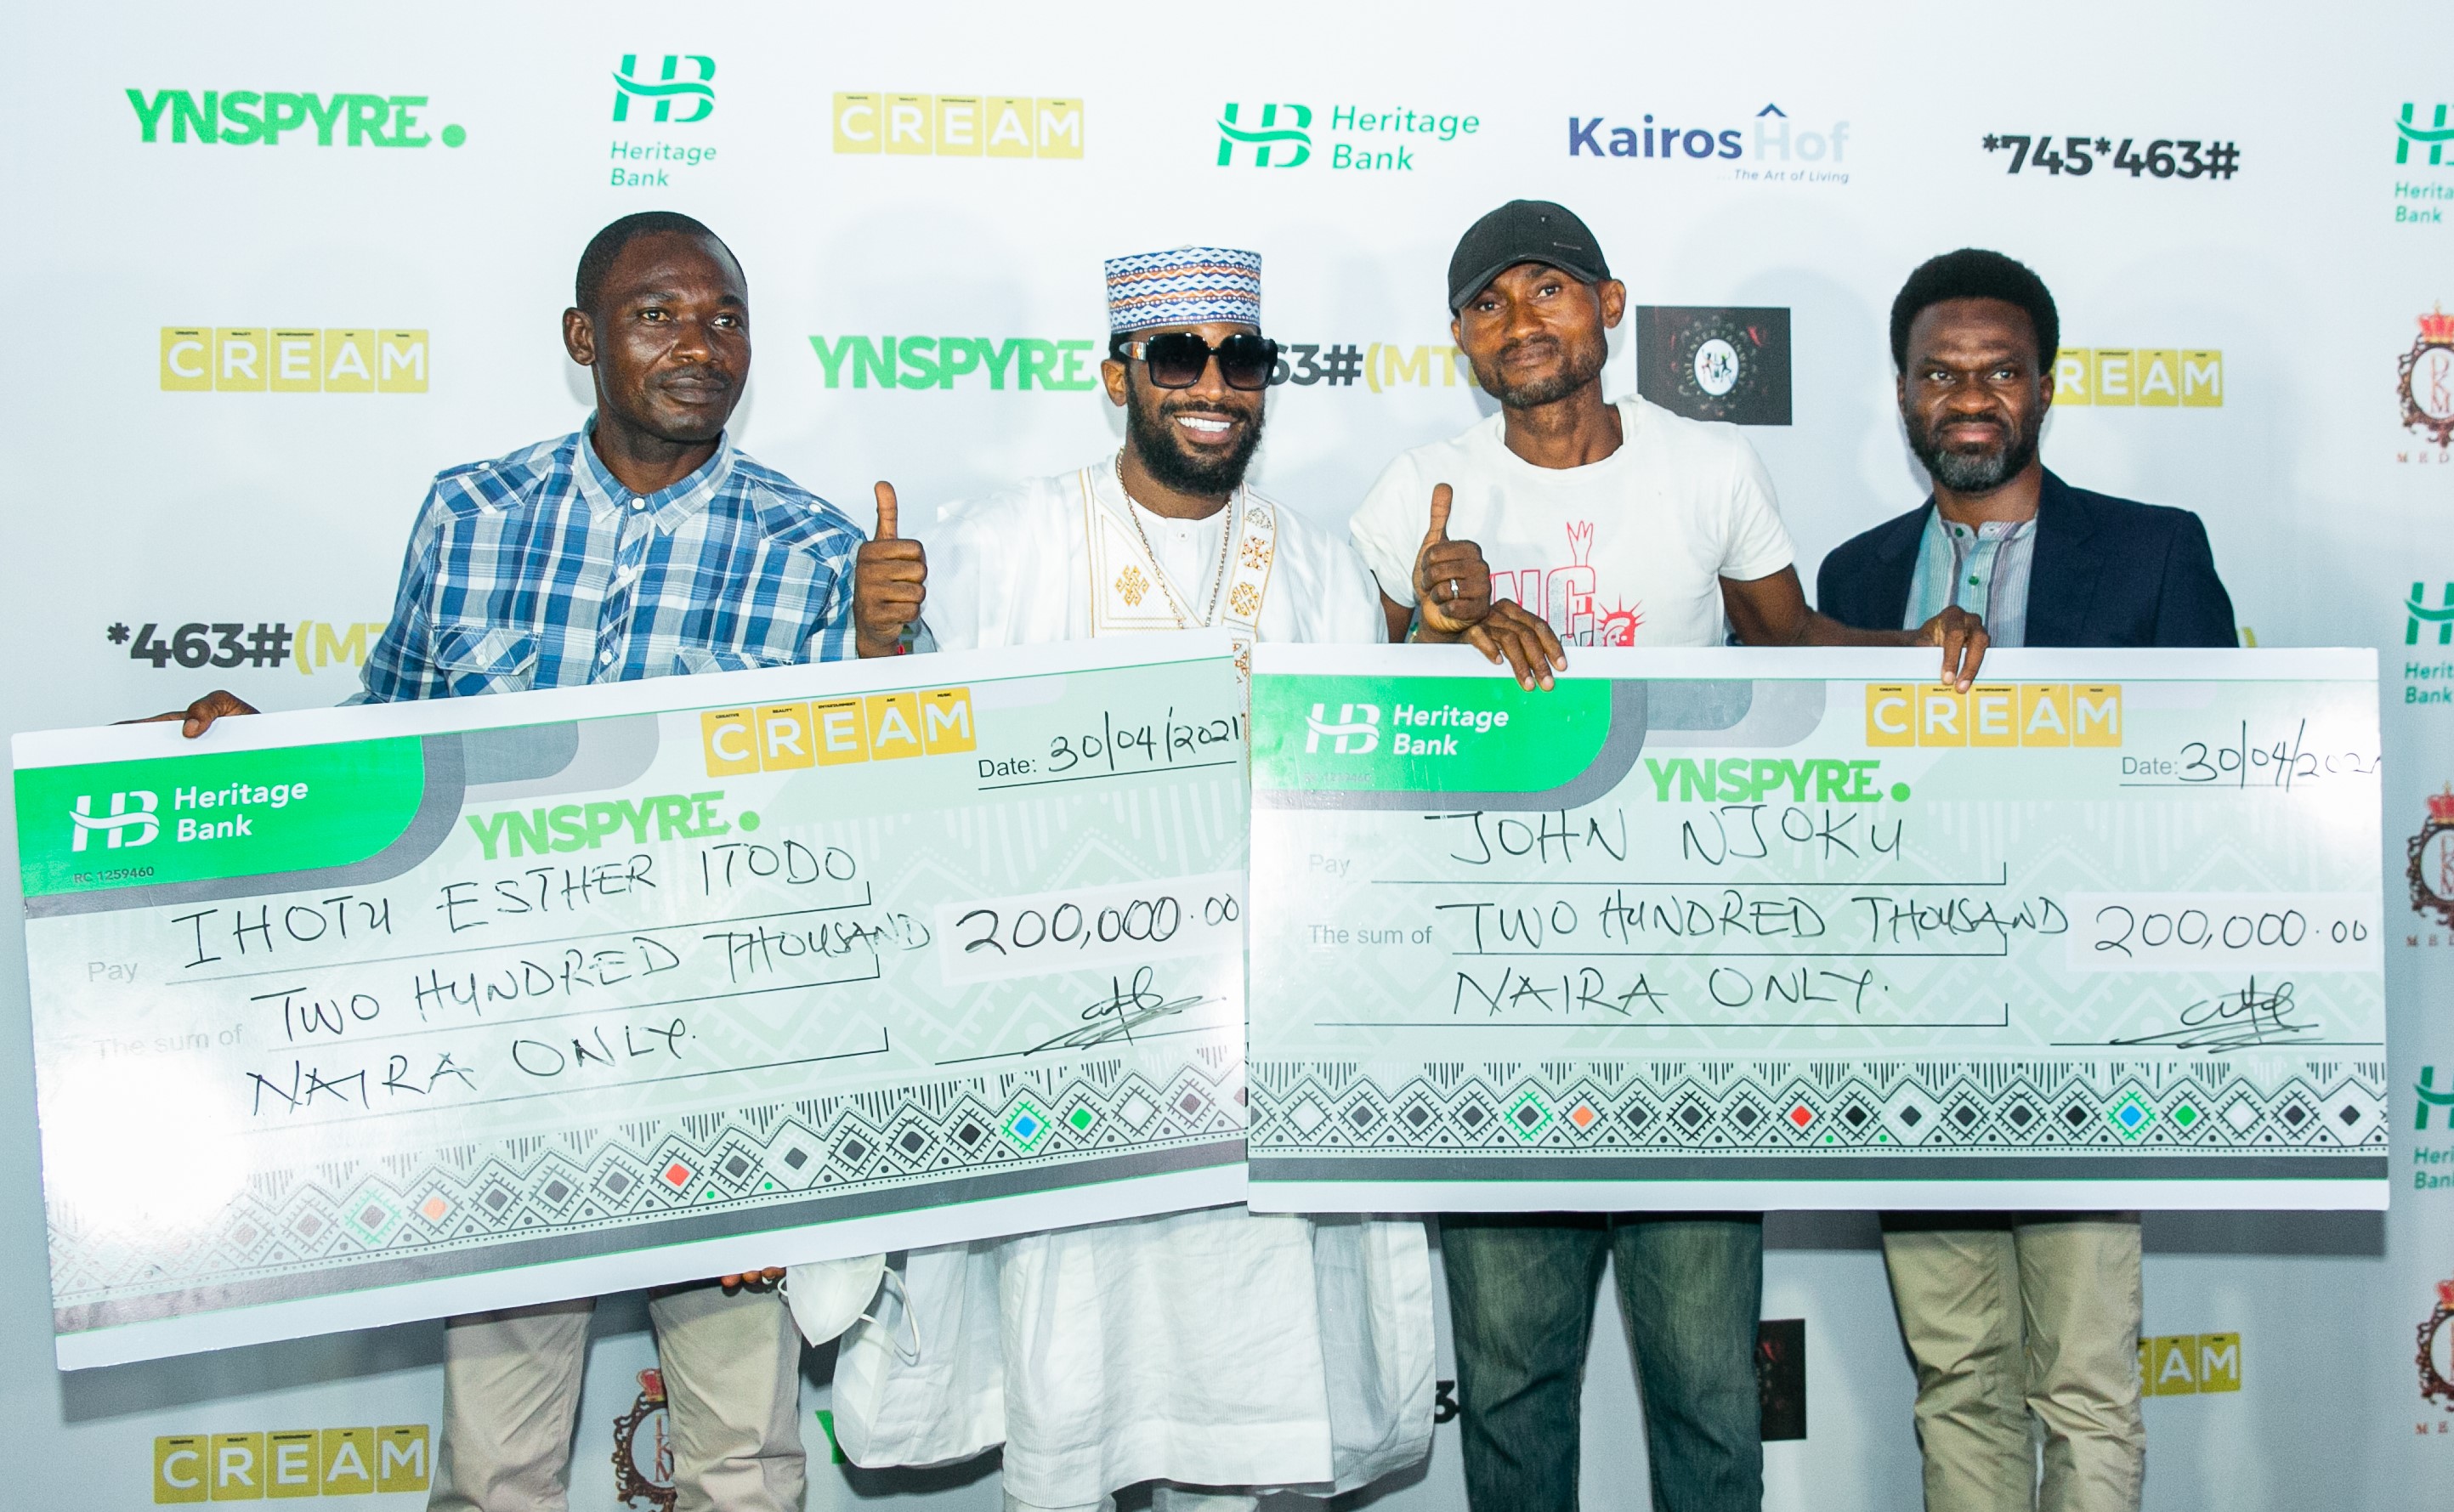 Heritage bank gifts winners of YNSPYRE, CREAM Platform over N12m in April draw